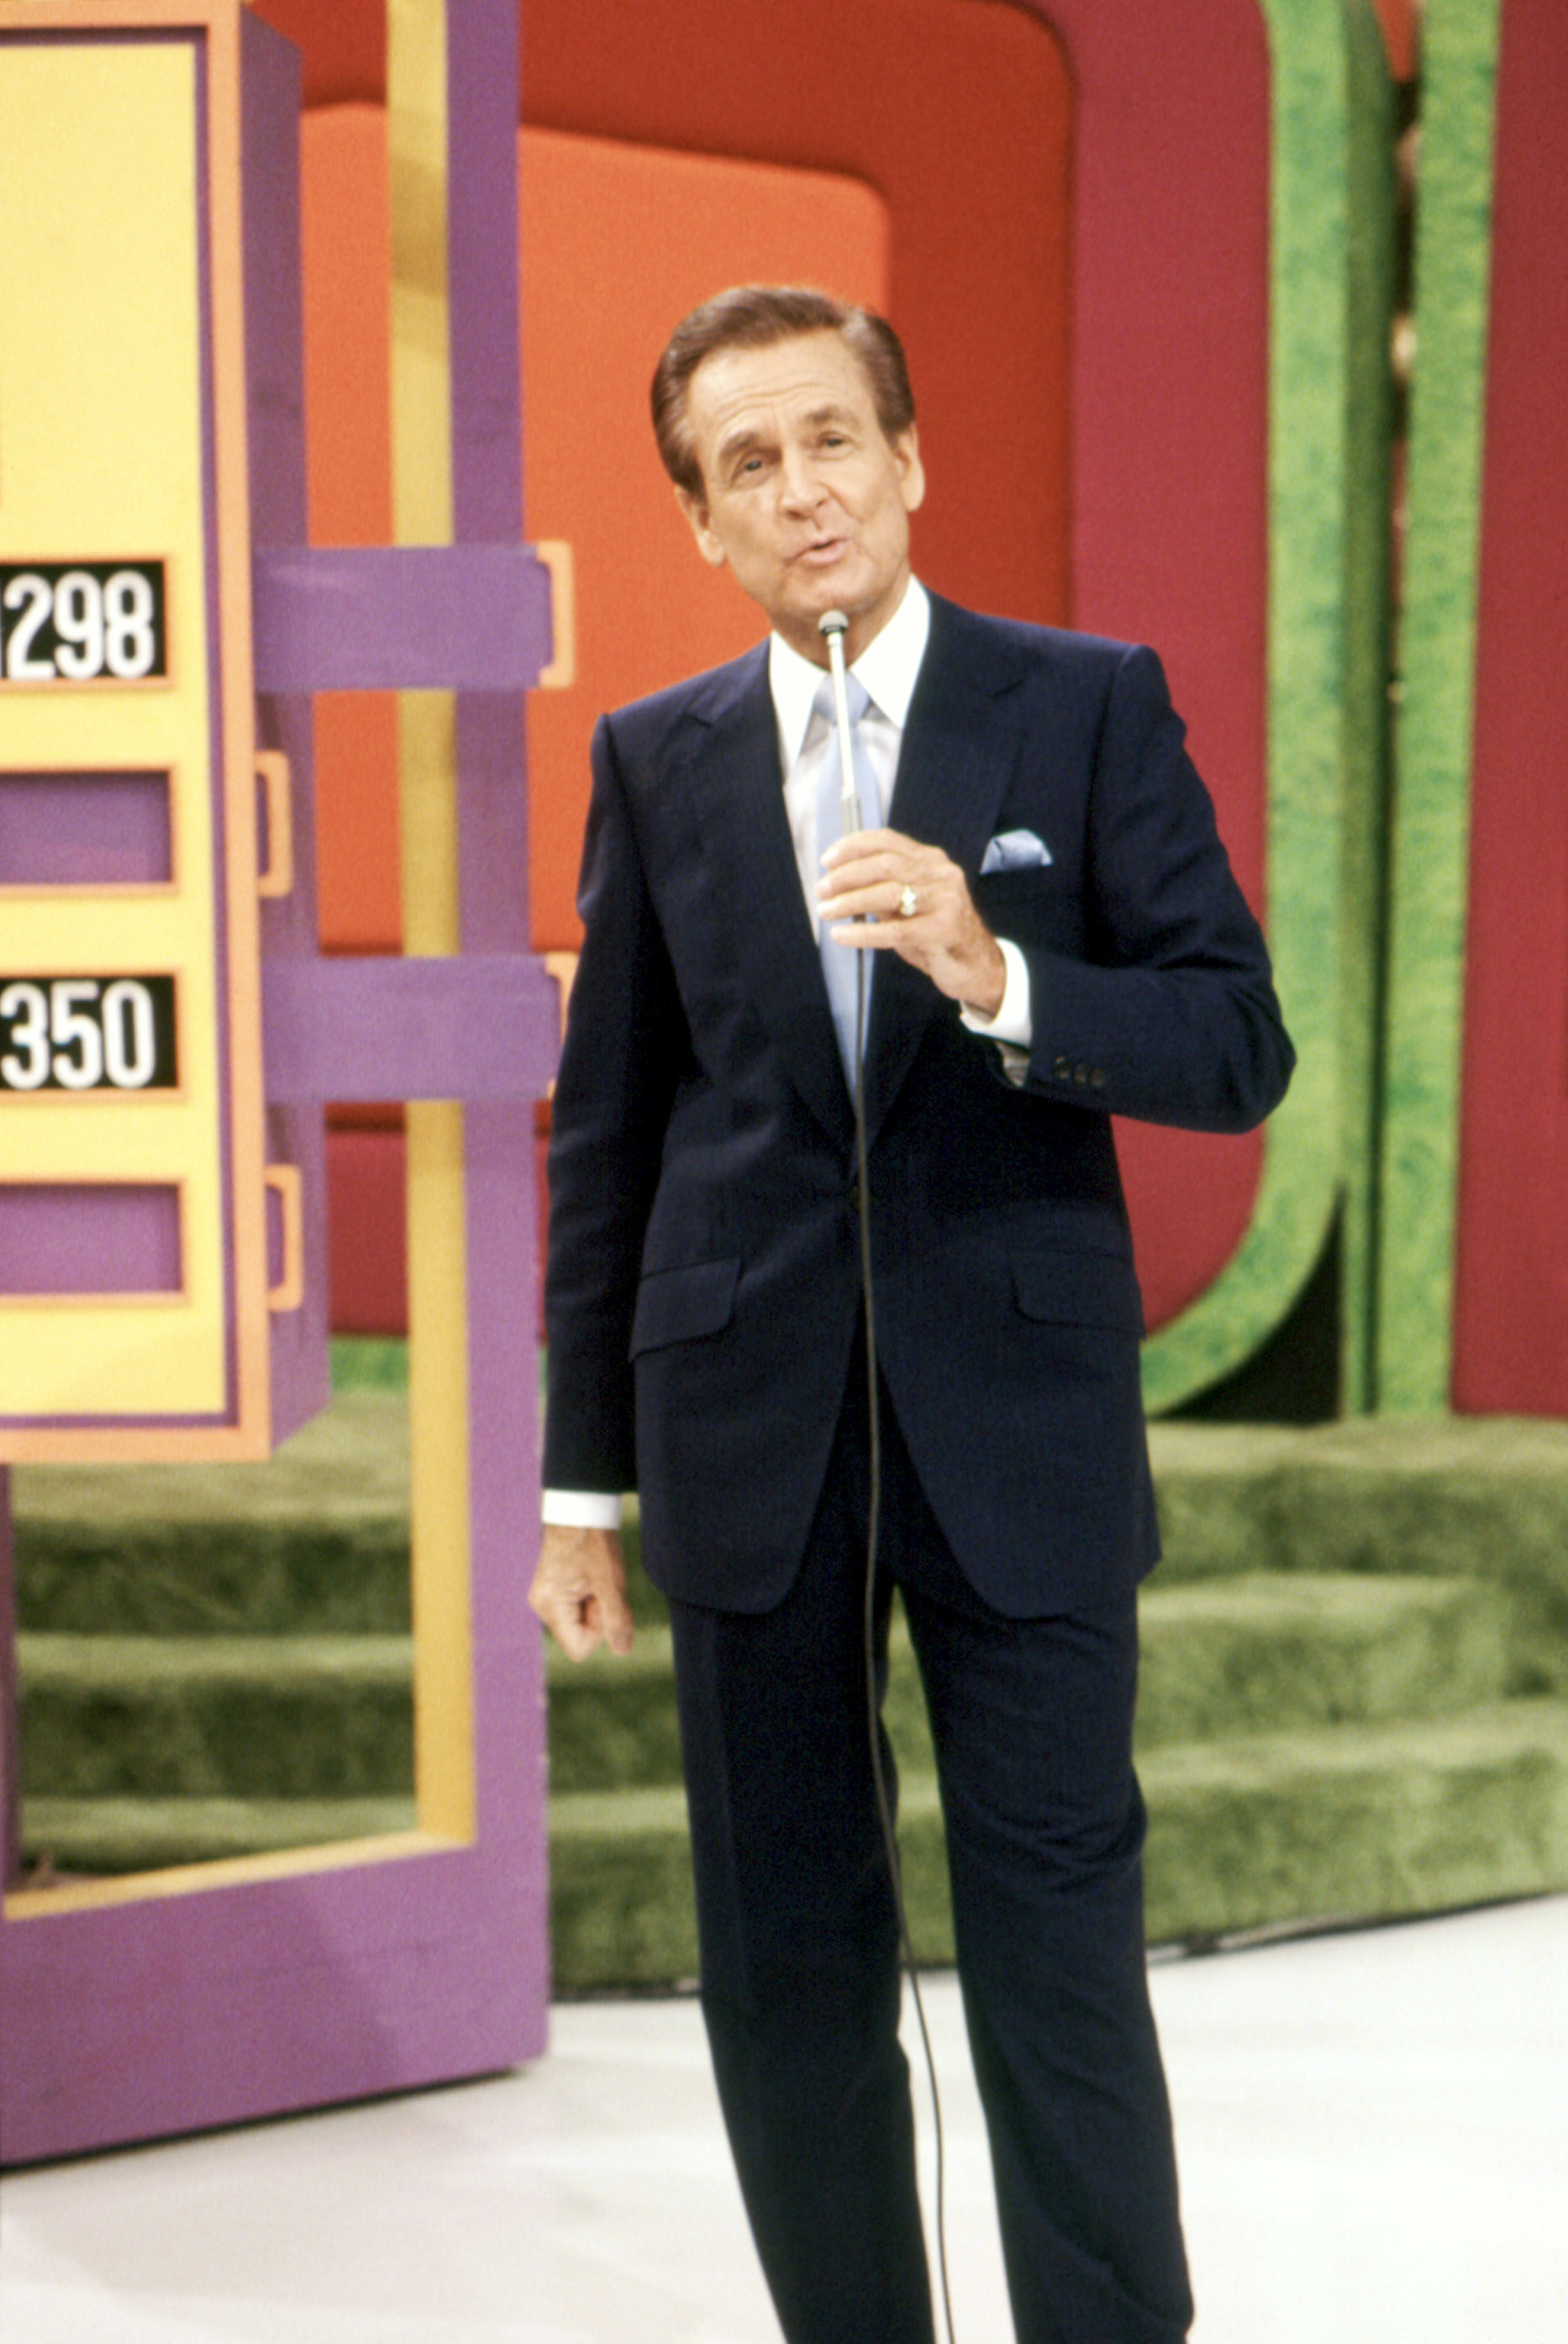 Bob Barker hosting the price is right